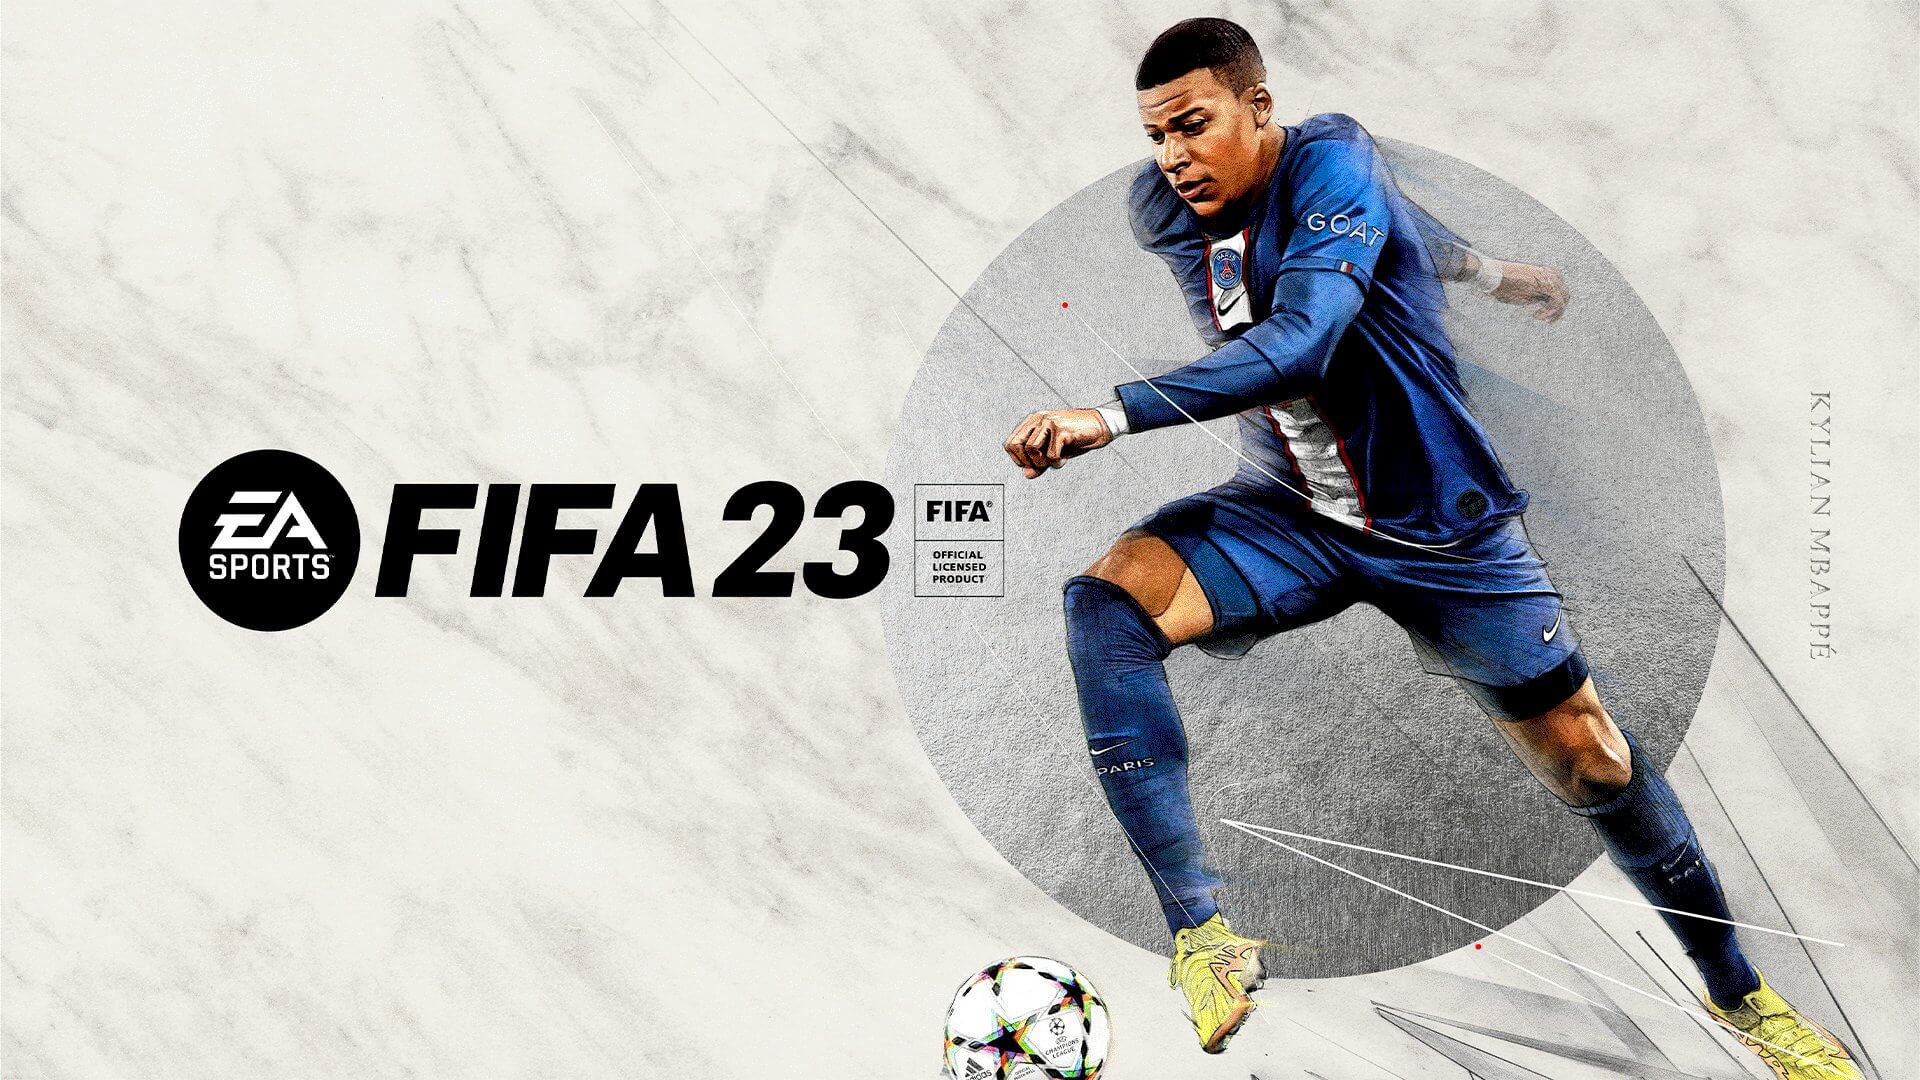 ea signed an agreement with juventus for fifa 23!